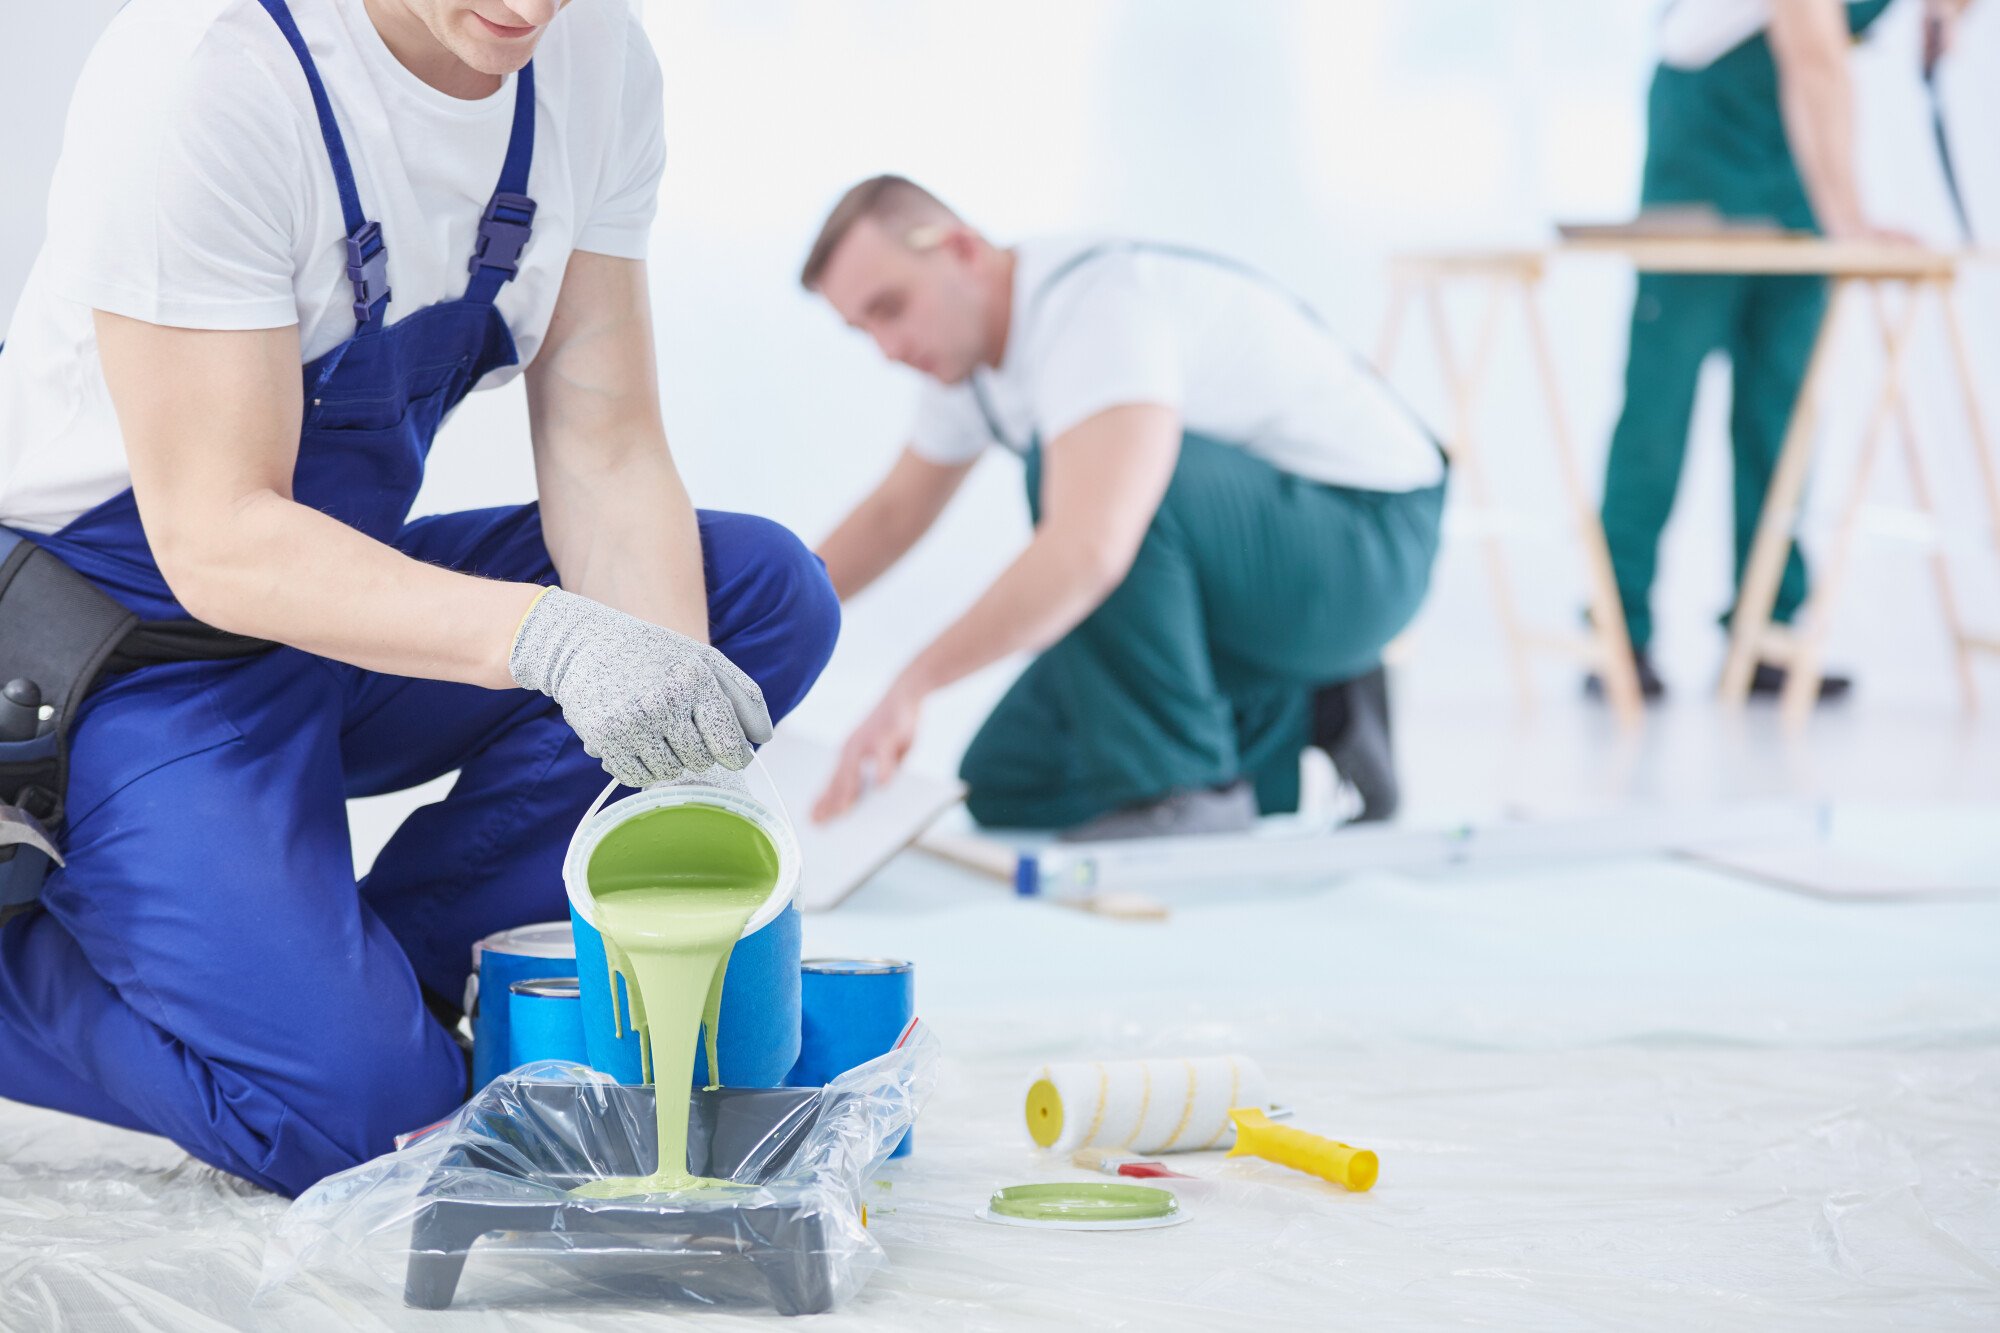 It is essential to choose a professional and reliable commercial painting company. This is how to choose the best commercial paint contractors for the job.